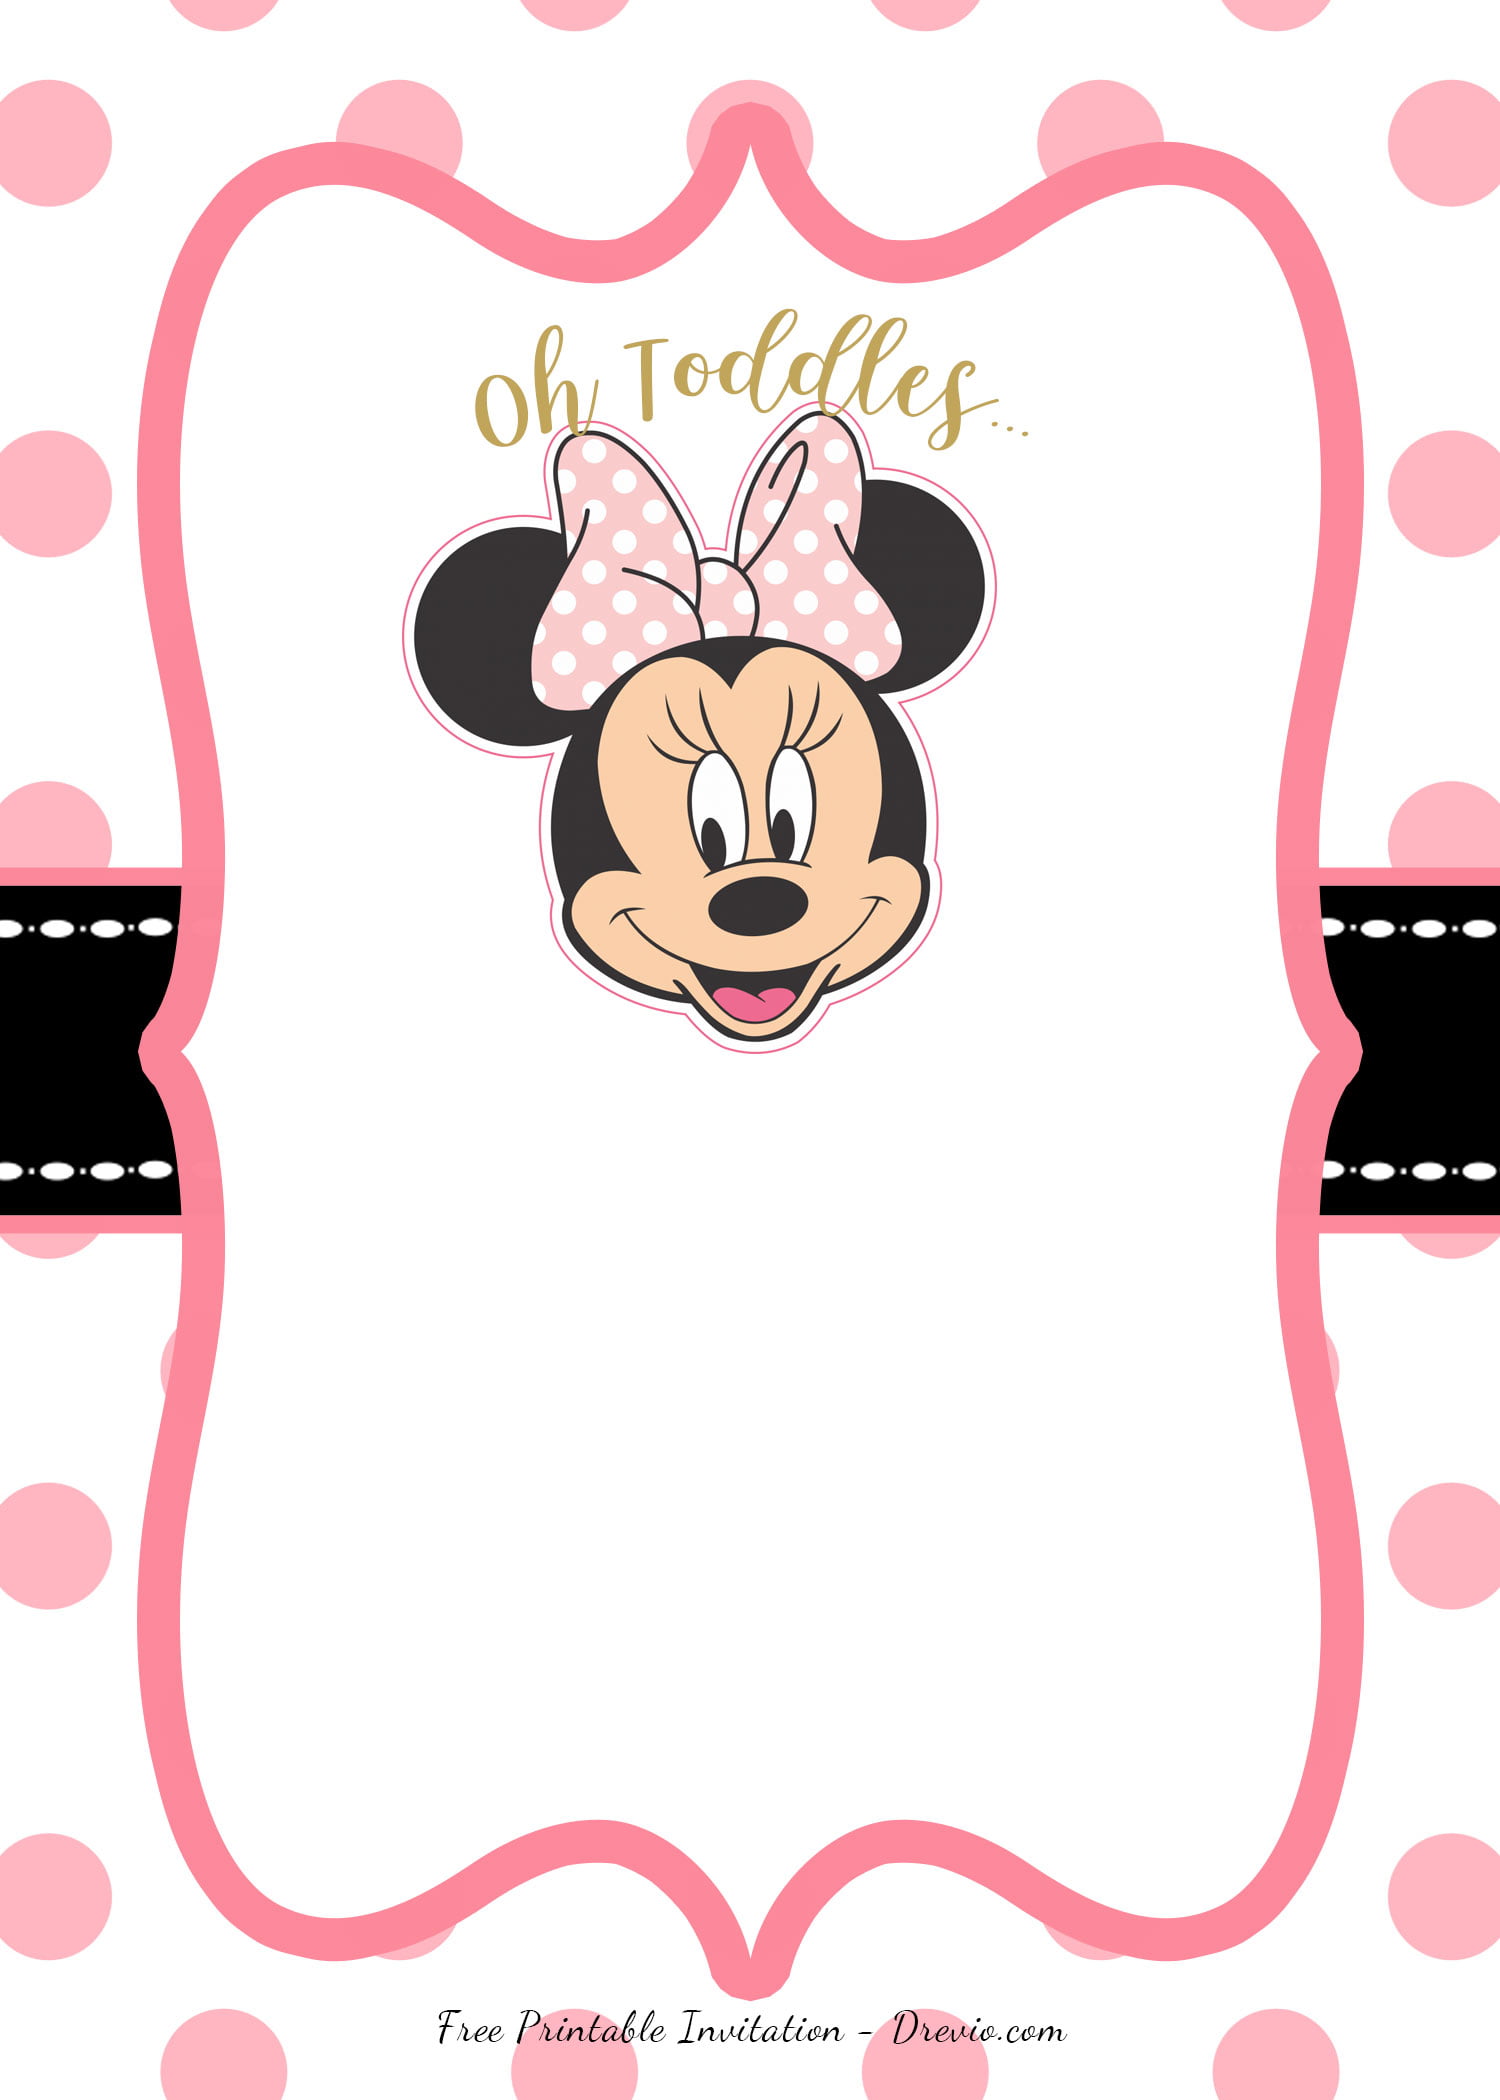 Minnie Mouse Head Template from www.bagvania.com